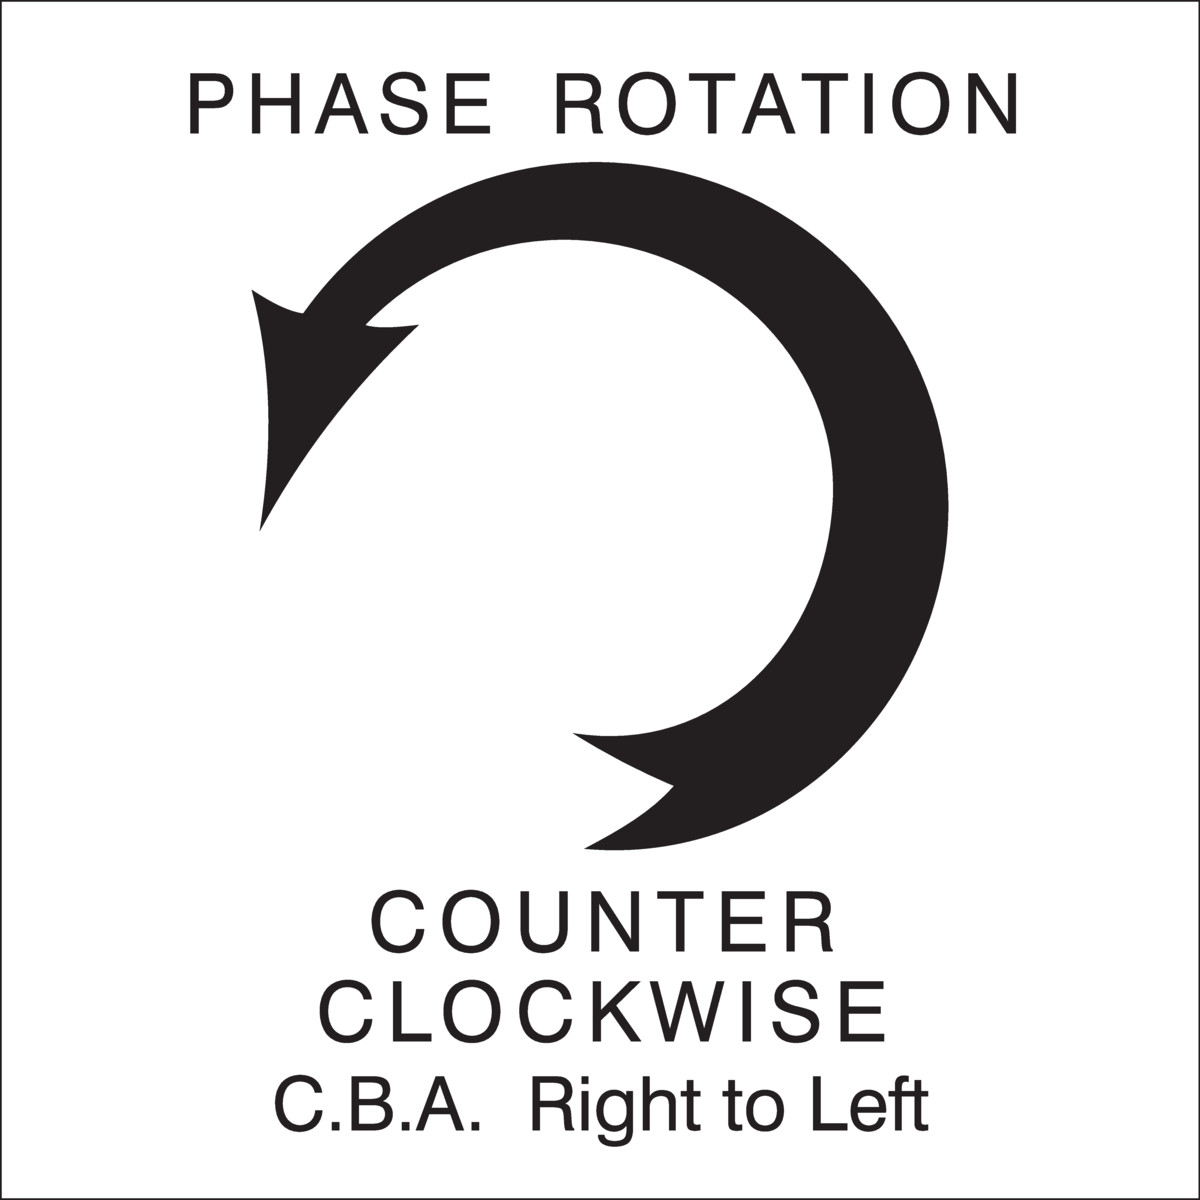 White Counter Clockwise Right to Left Arrow Phase Rotation Label